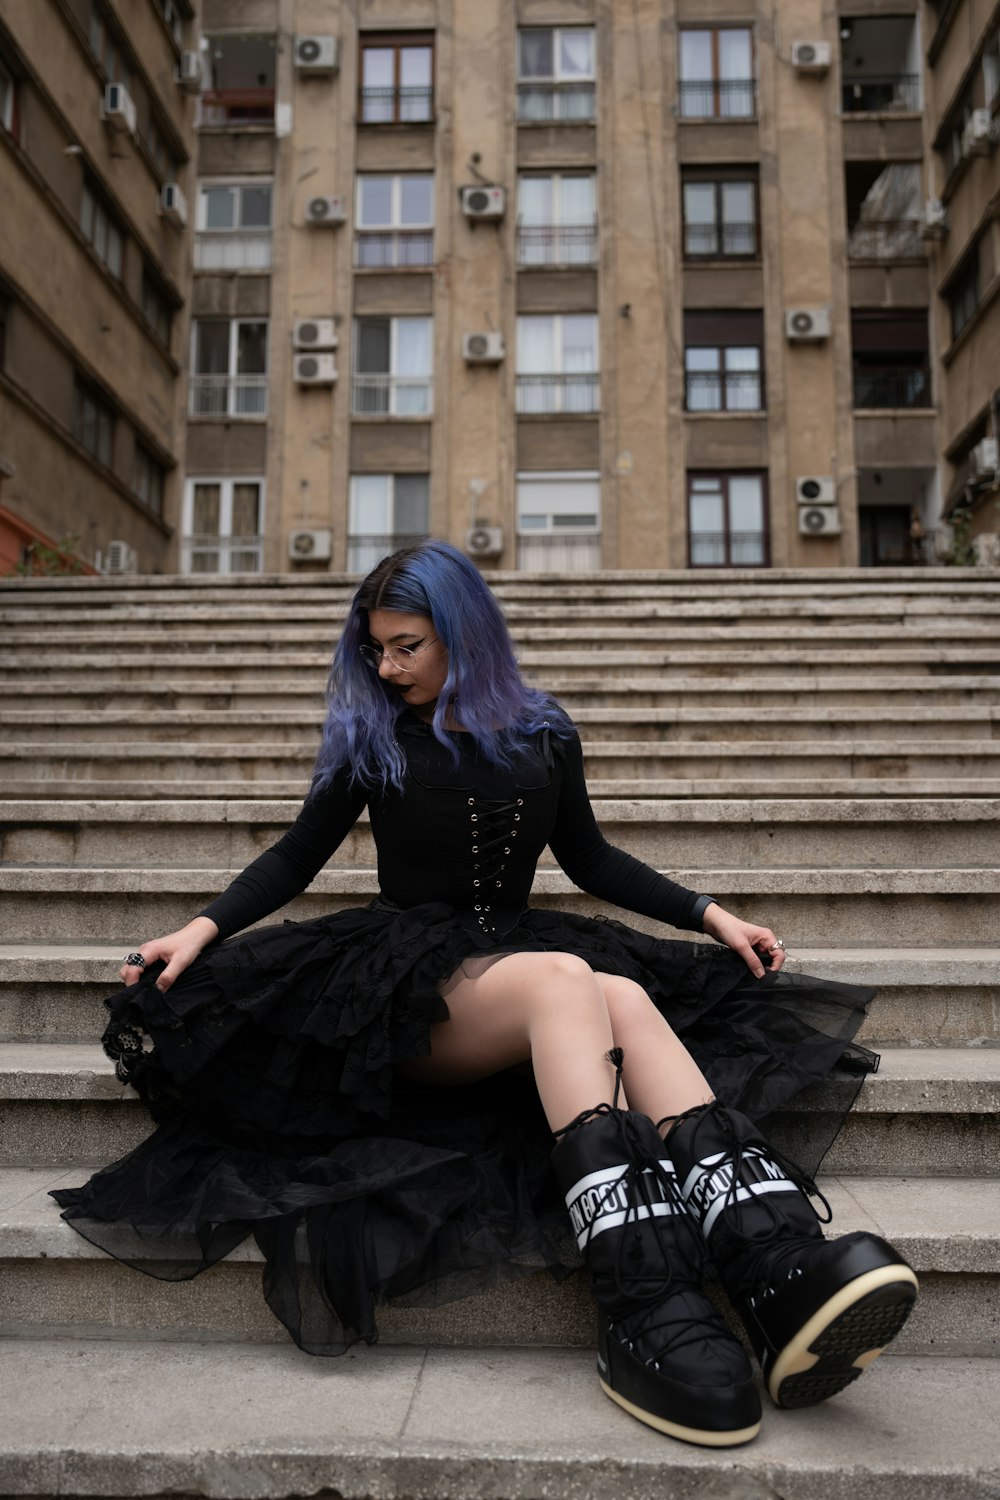 a woman with blue hair sitting on some steps